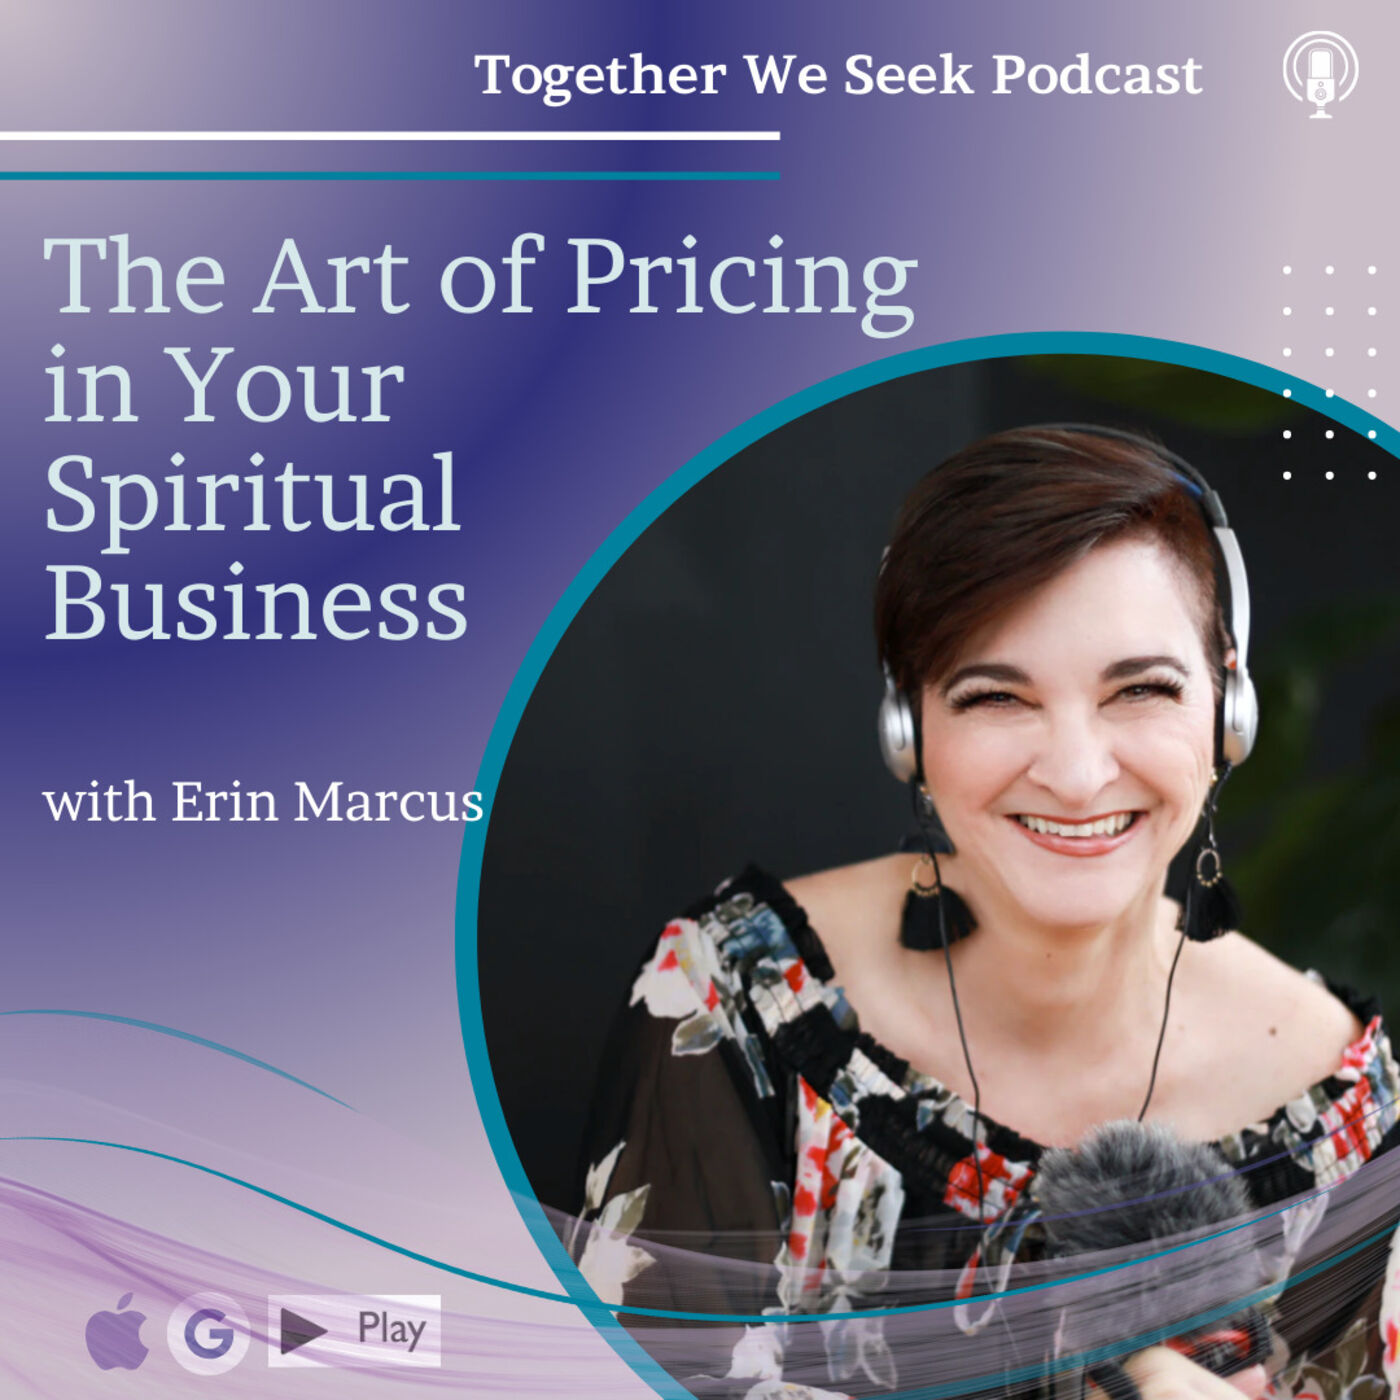 The Art of Pricing in Your Spiritual or Heart-Centered Business with Erin Marcus